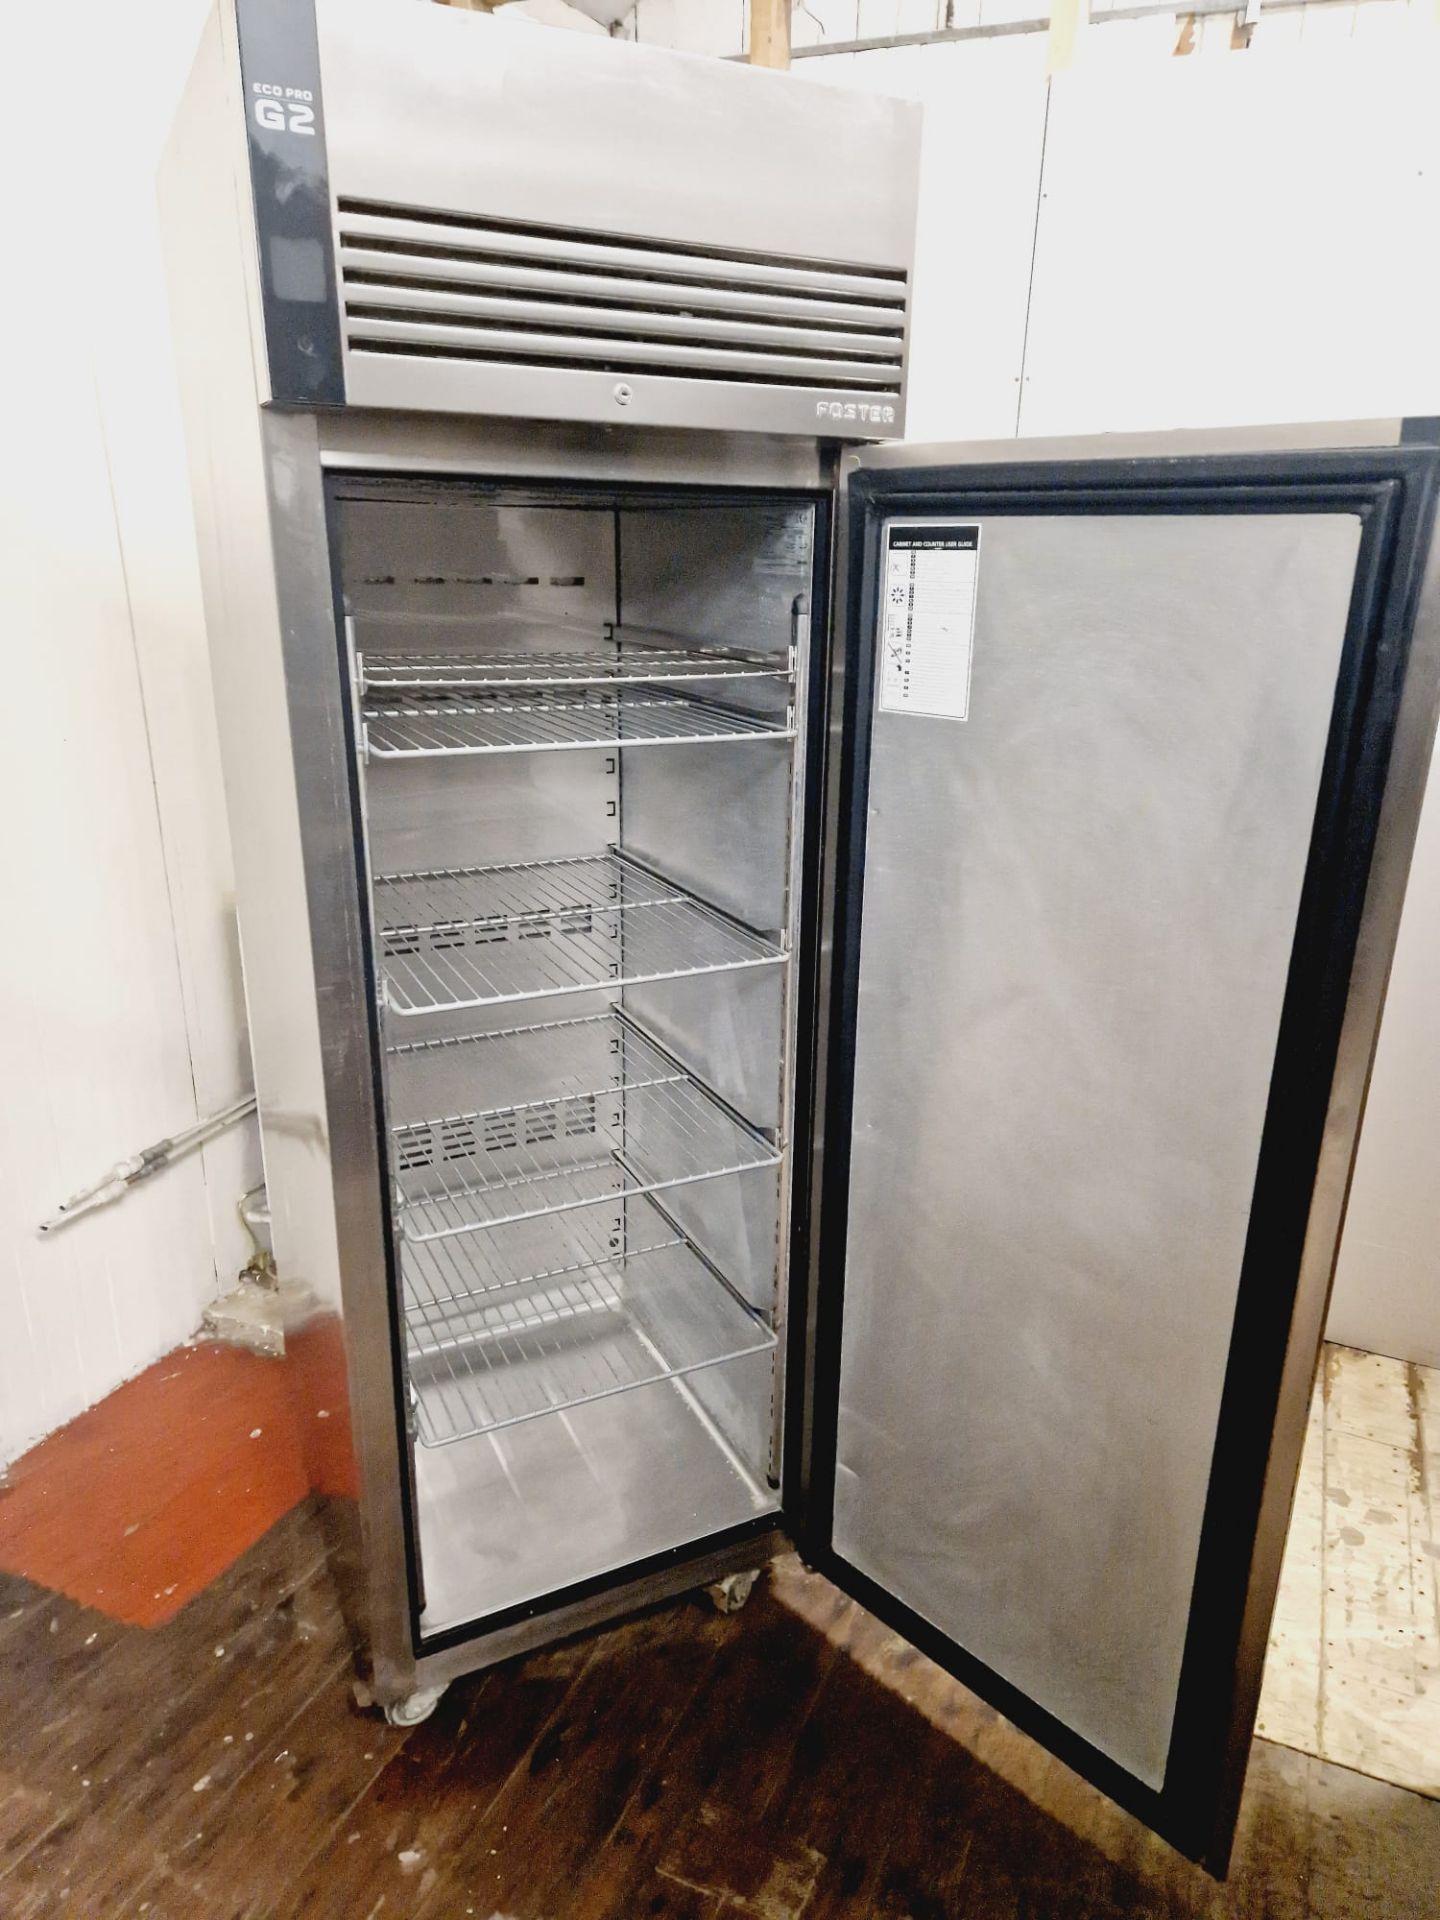 FOSTER G2 UPRIGHT FRIDGE FULLY WORKING  AND SERVICED - Image 4 of 4